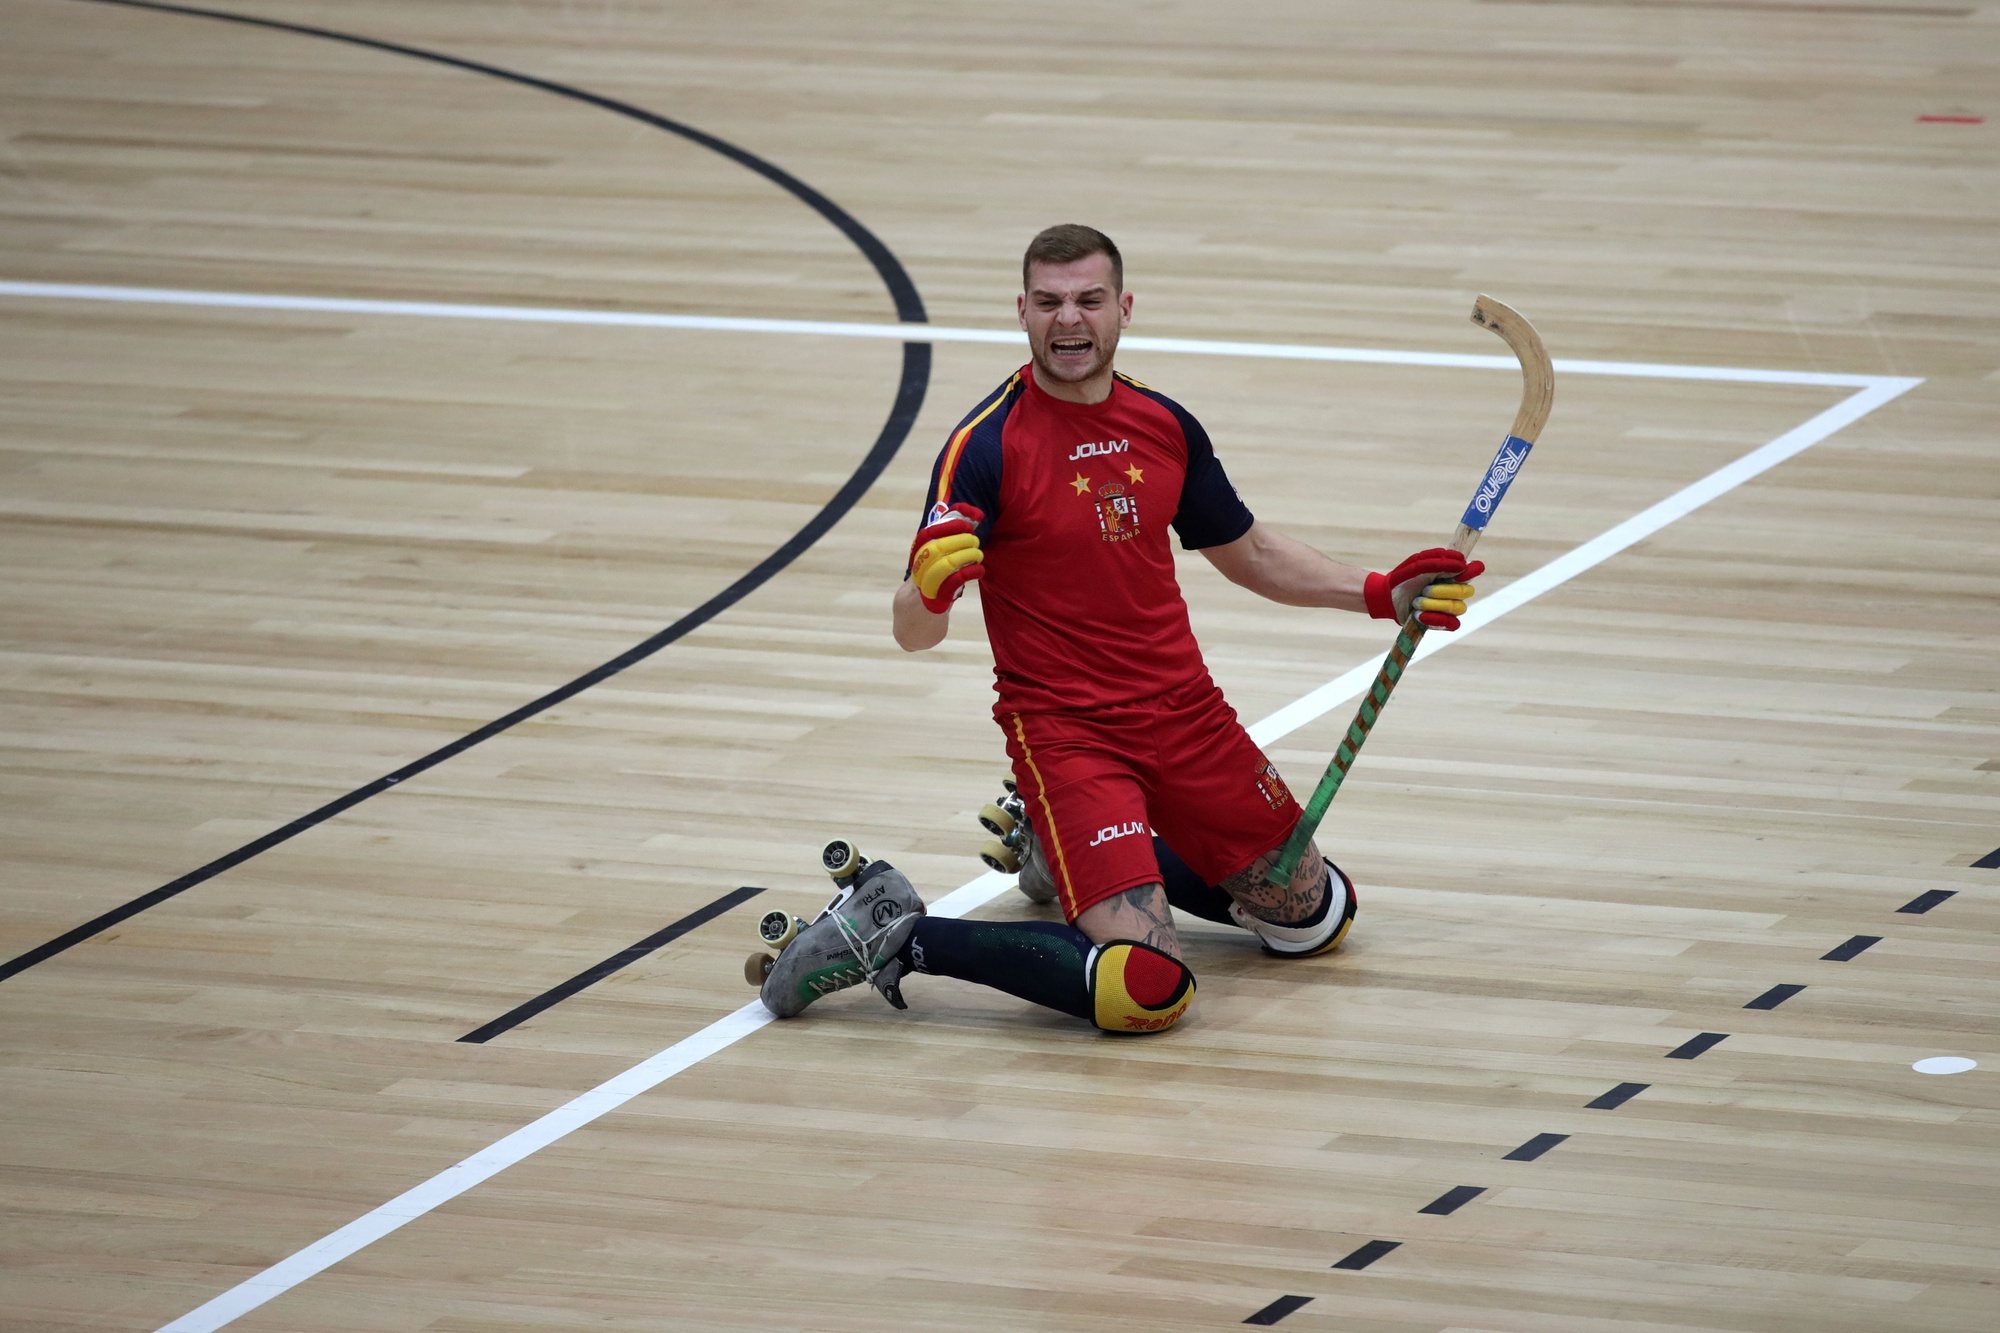 Spain national roller field hockey team player Cesar Carballeira celebrates a goal against France, during the final of the European Roller Hockey Championship, at the Pavilhão Multiusos in Paredes, Portugal, 20th November 2021. ESTELA SILVA/LUSA